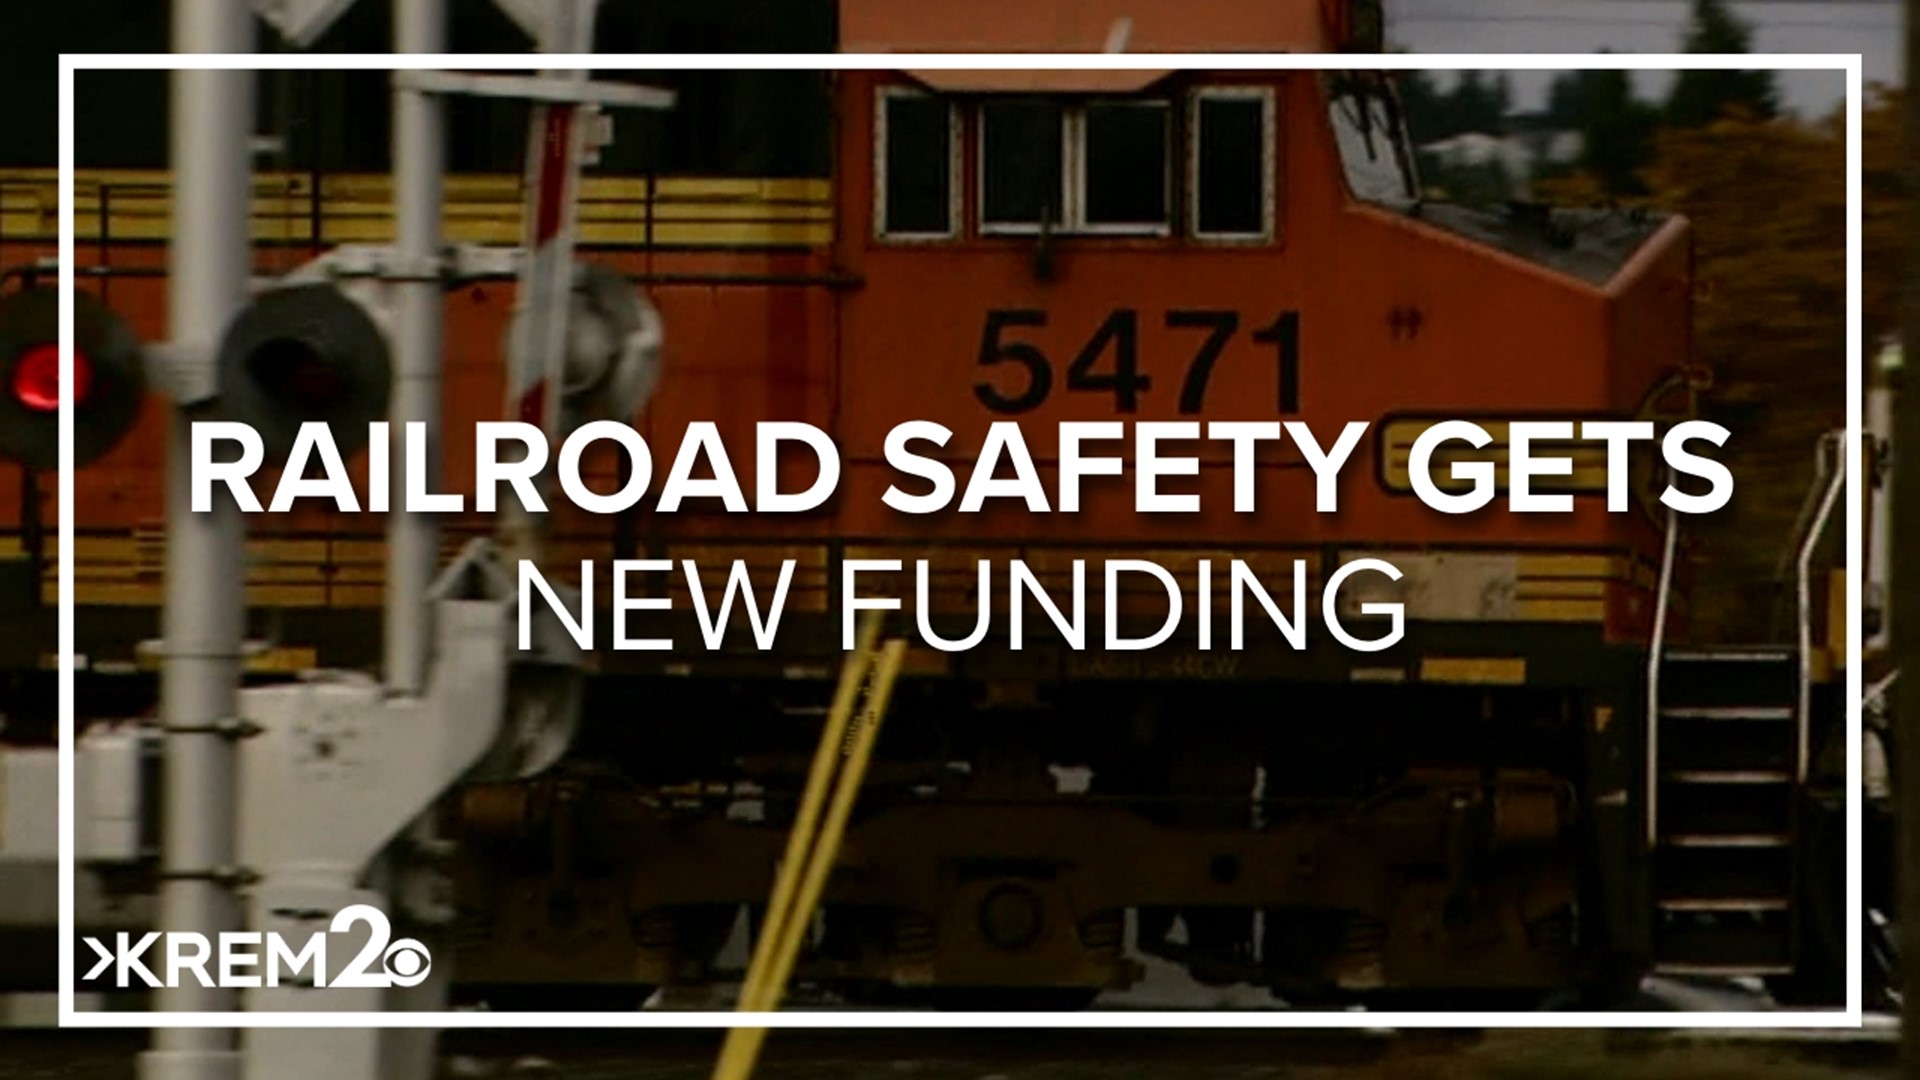 The PCC Railway is just one of 70 projects receiving this type of grant money from the U.S. Department of Transportation.